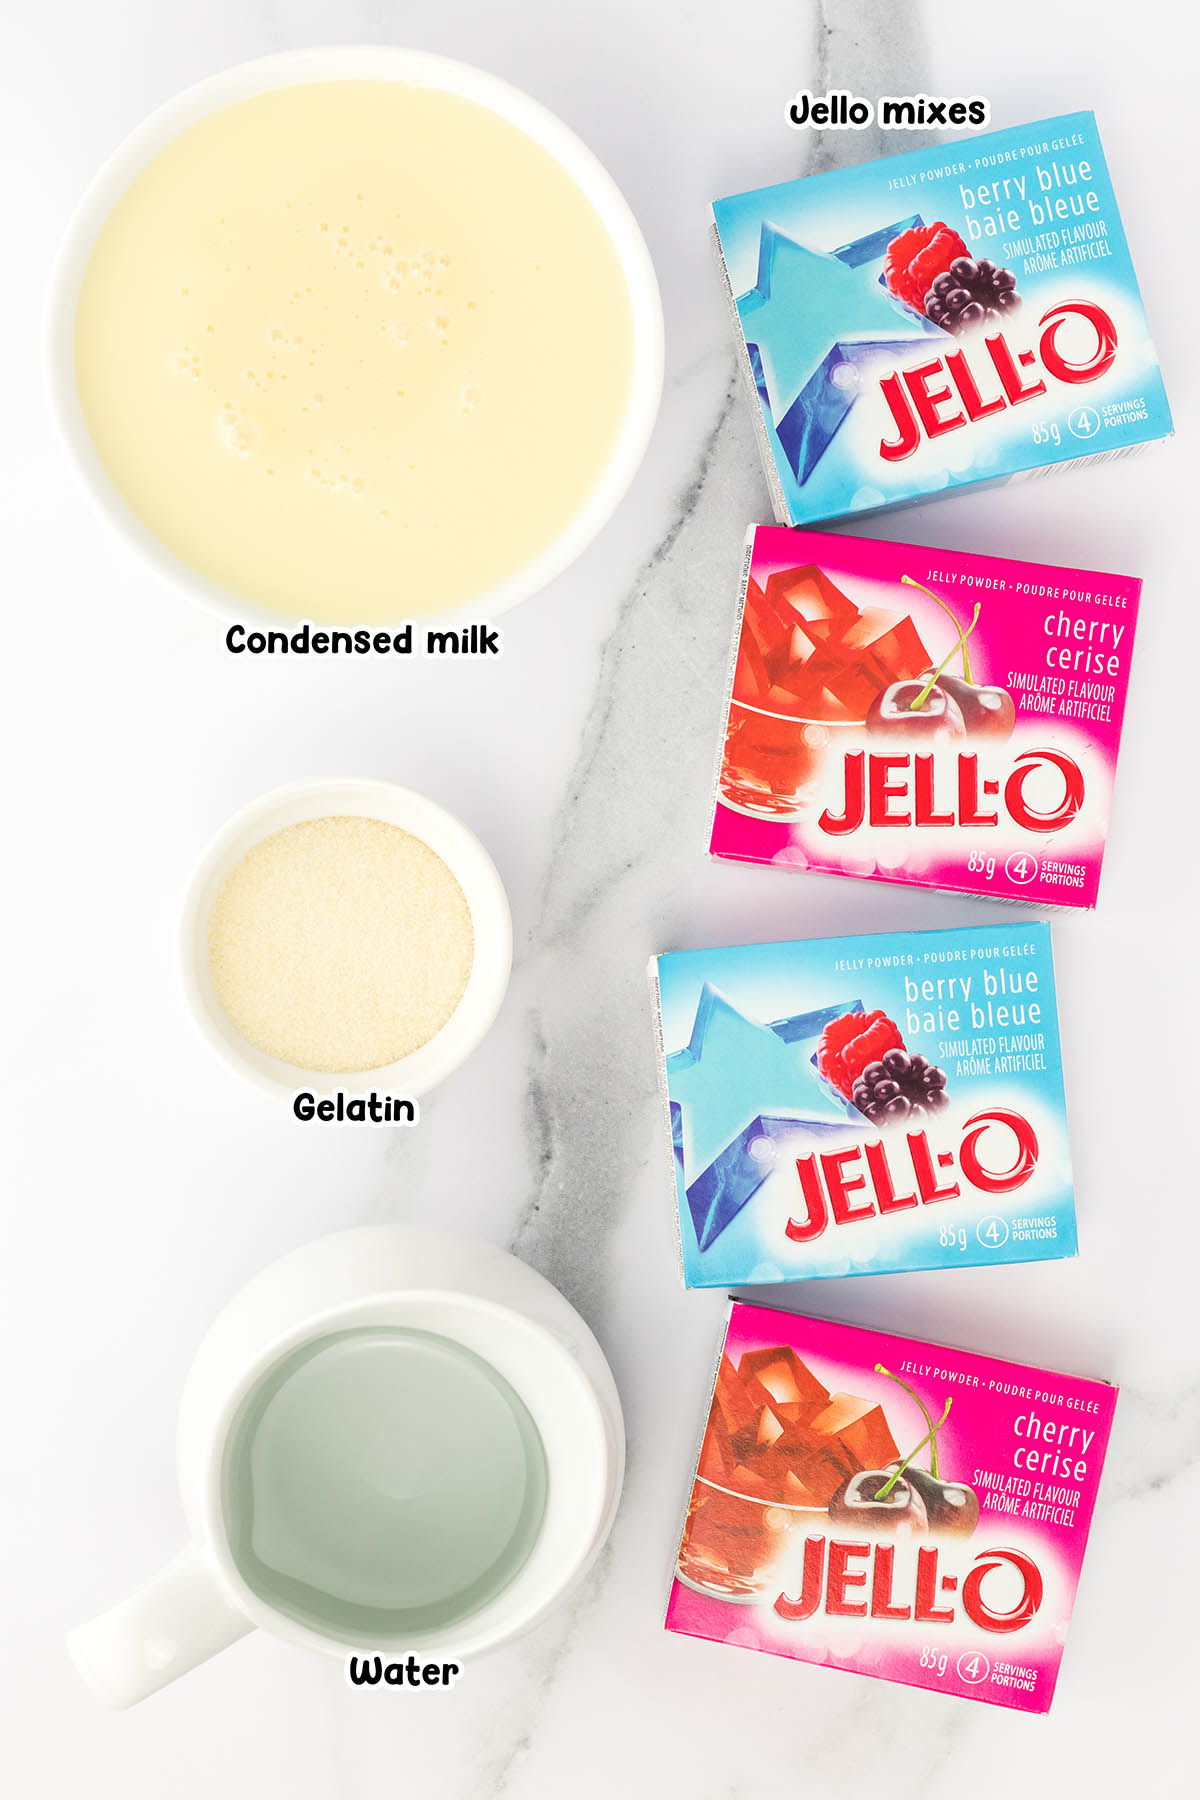 Red White and Blue Jello ingredients